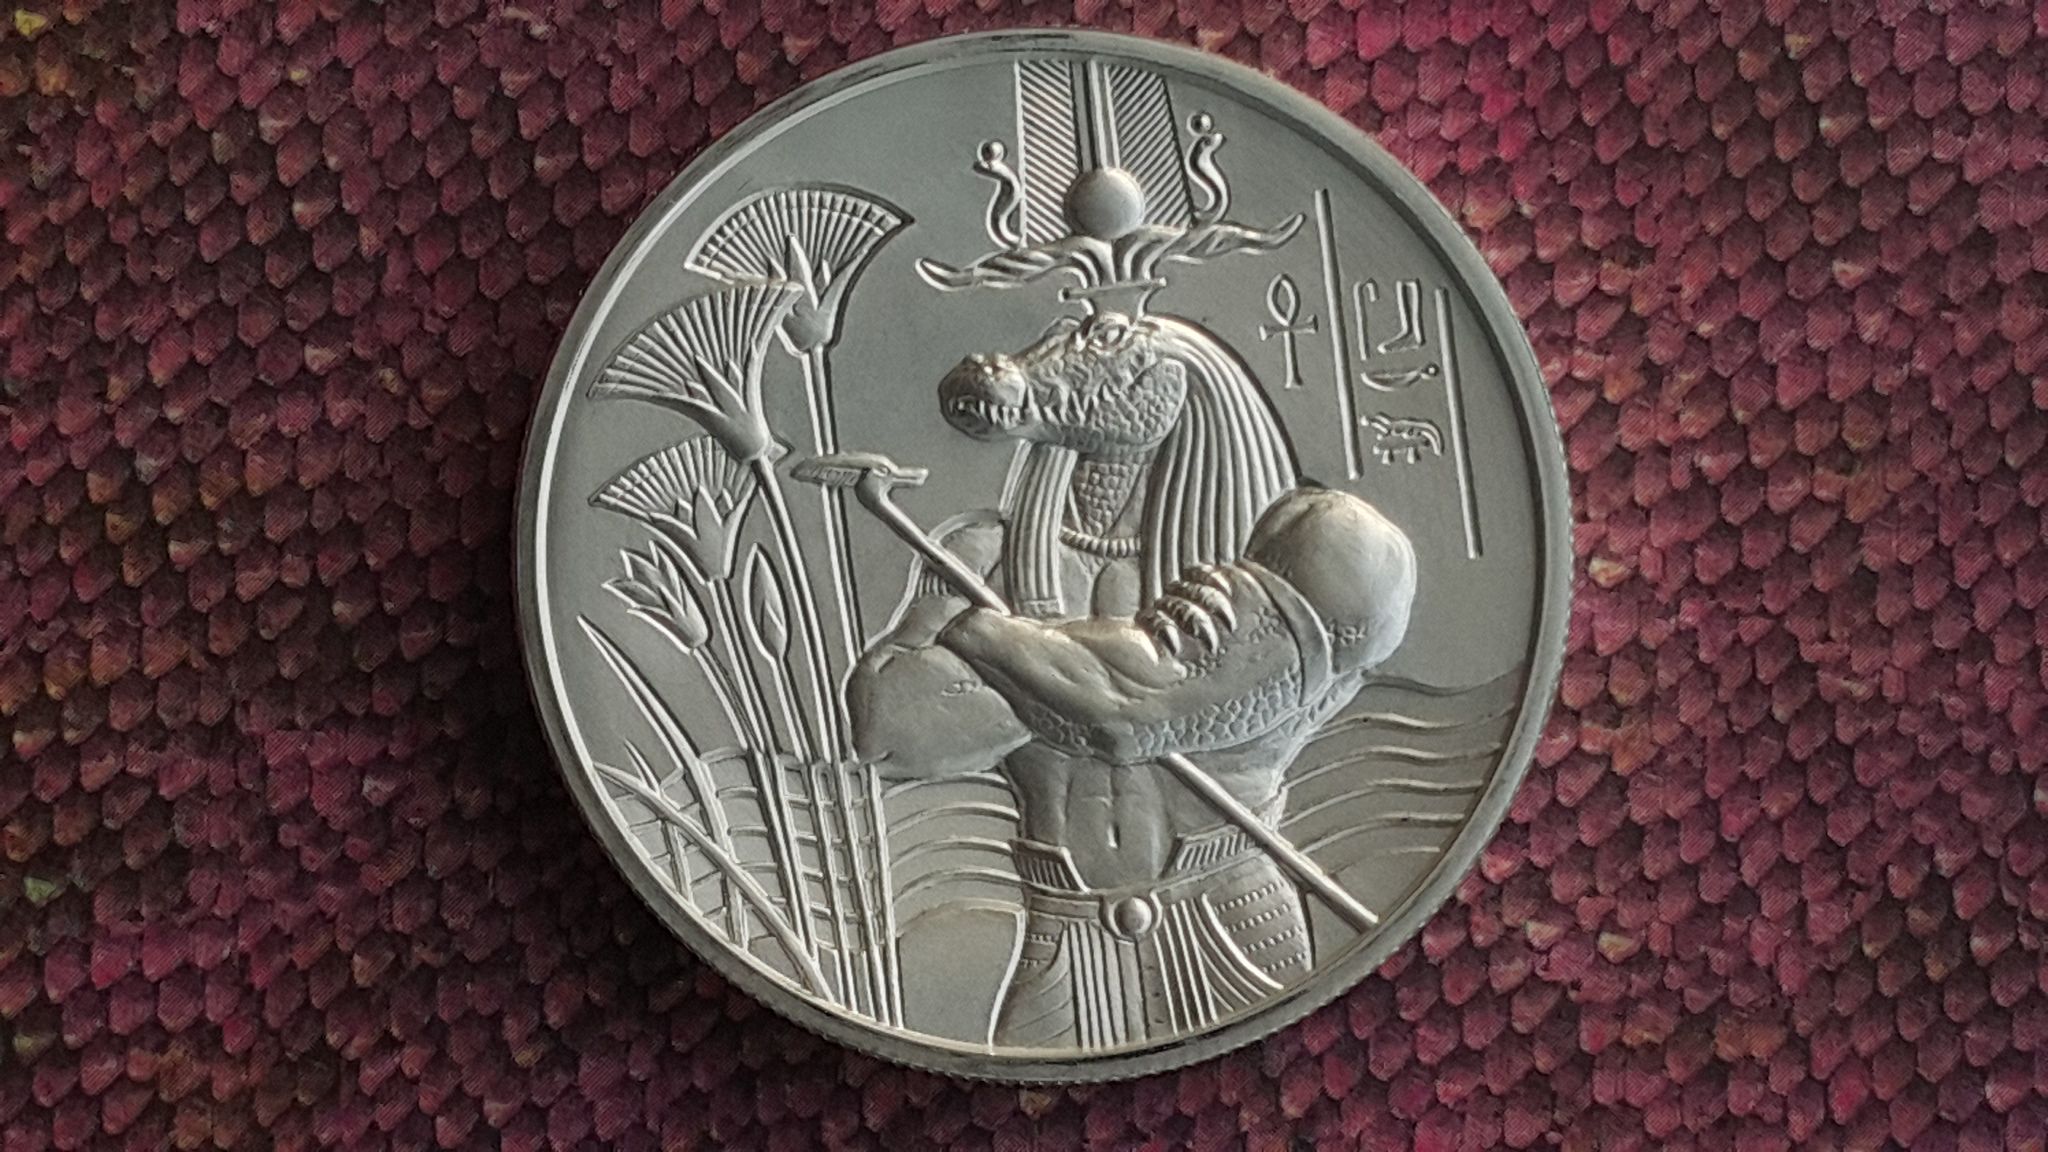 2 oz Silver Sobek Rounds (Egyptian Gods Series #3, New, High Relief) 